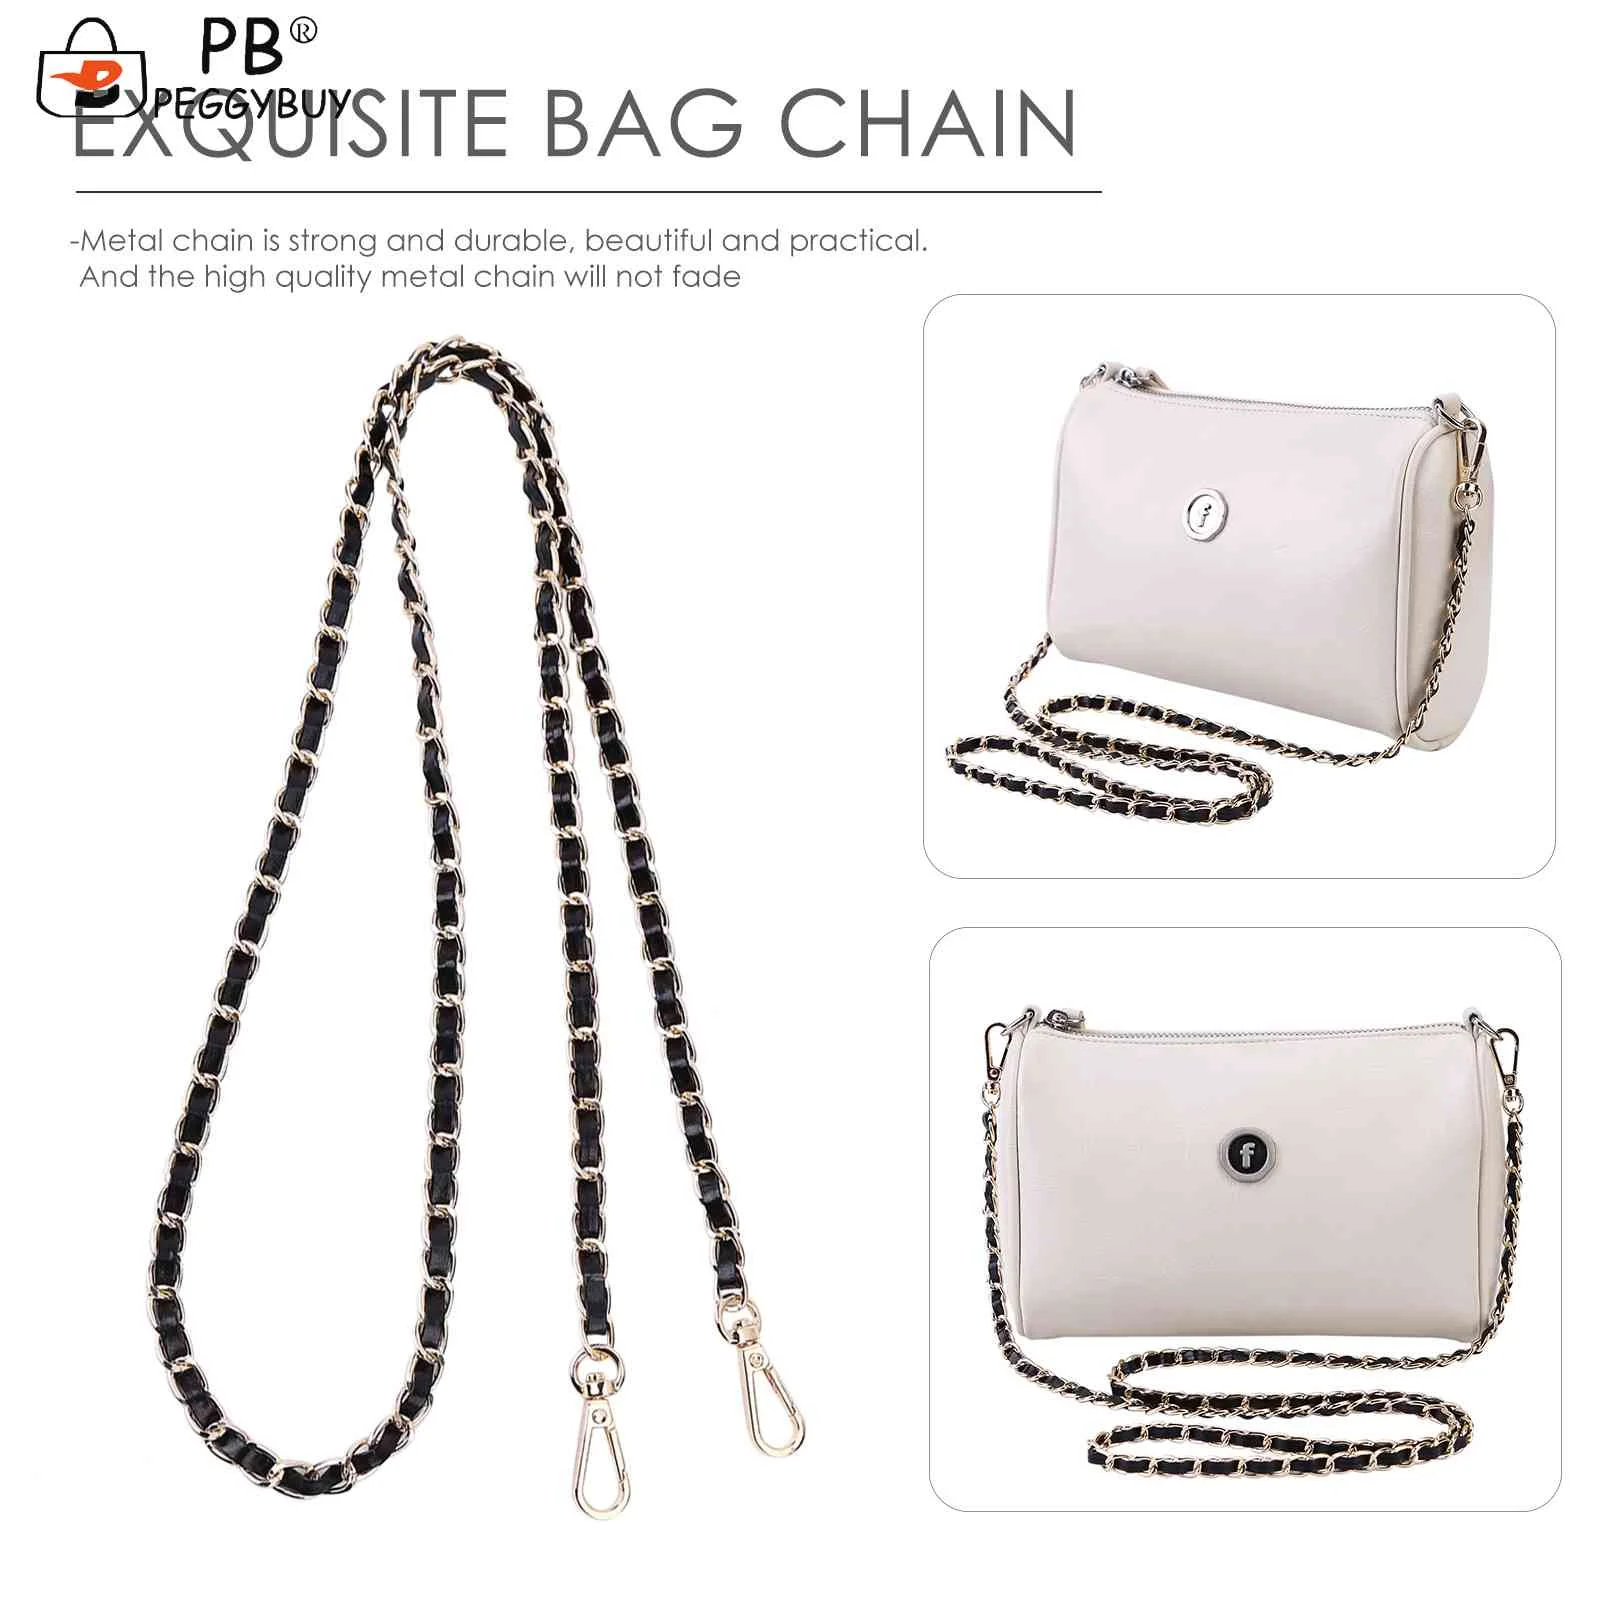 

DIY Purse Chain Strap - PU Leather Metal Chain Replacement for Shoulder Crossbody Bag Handbag 47 inches Long with Buckles 2Pcs